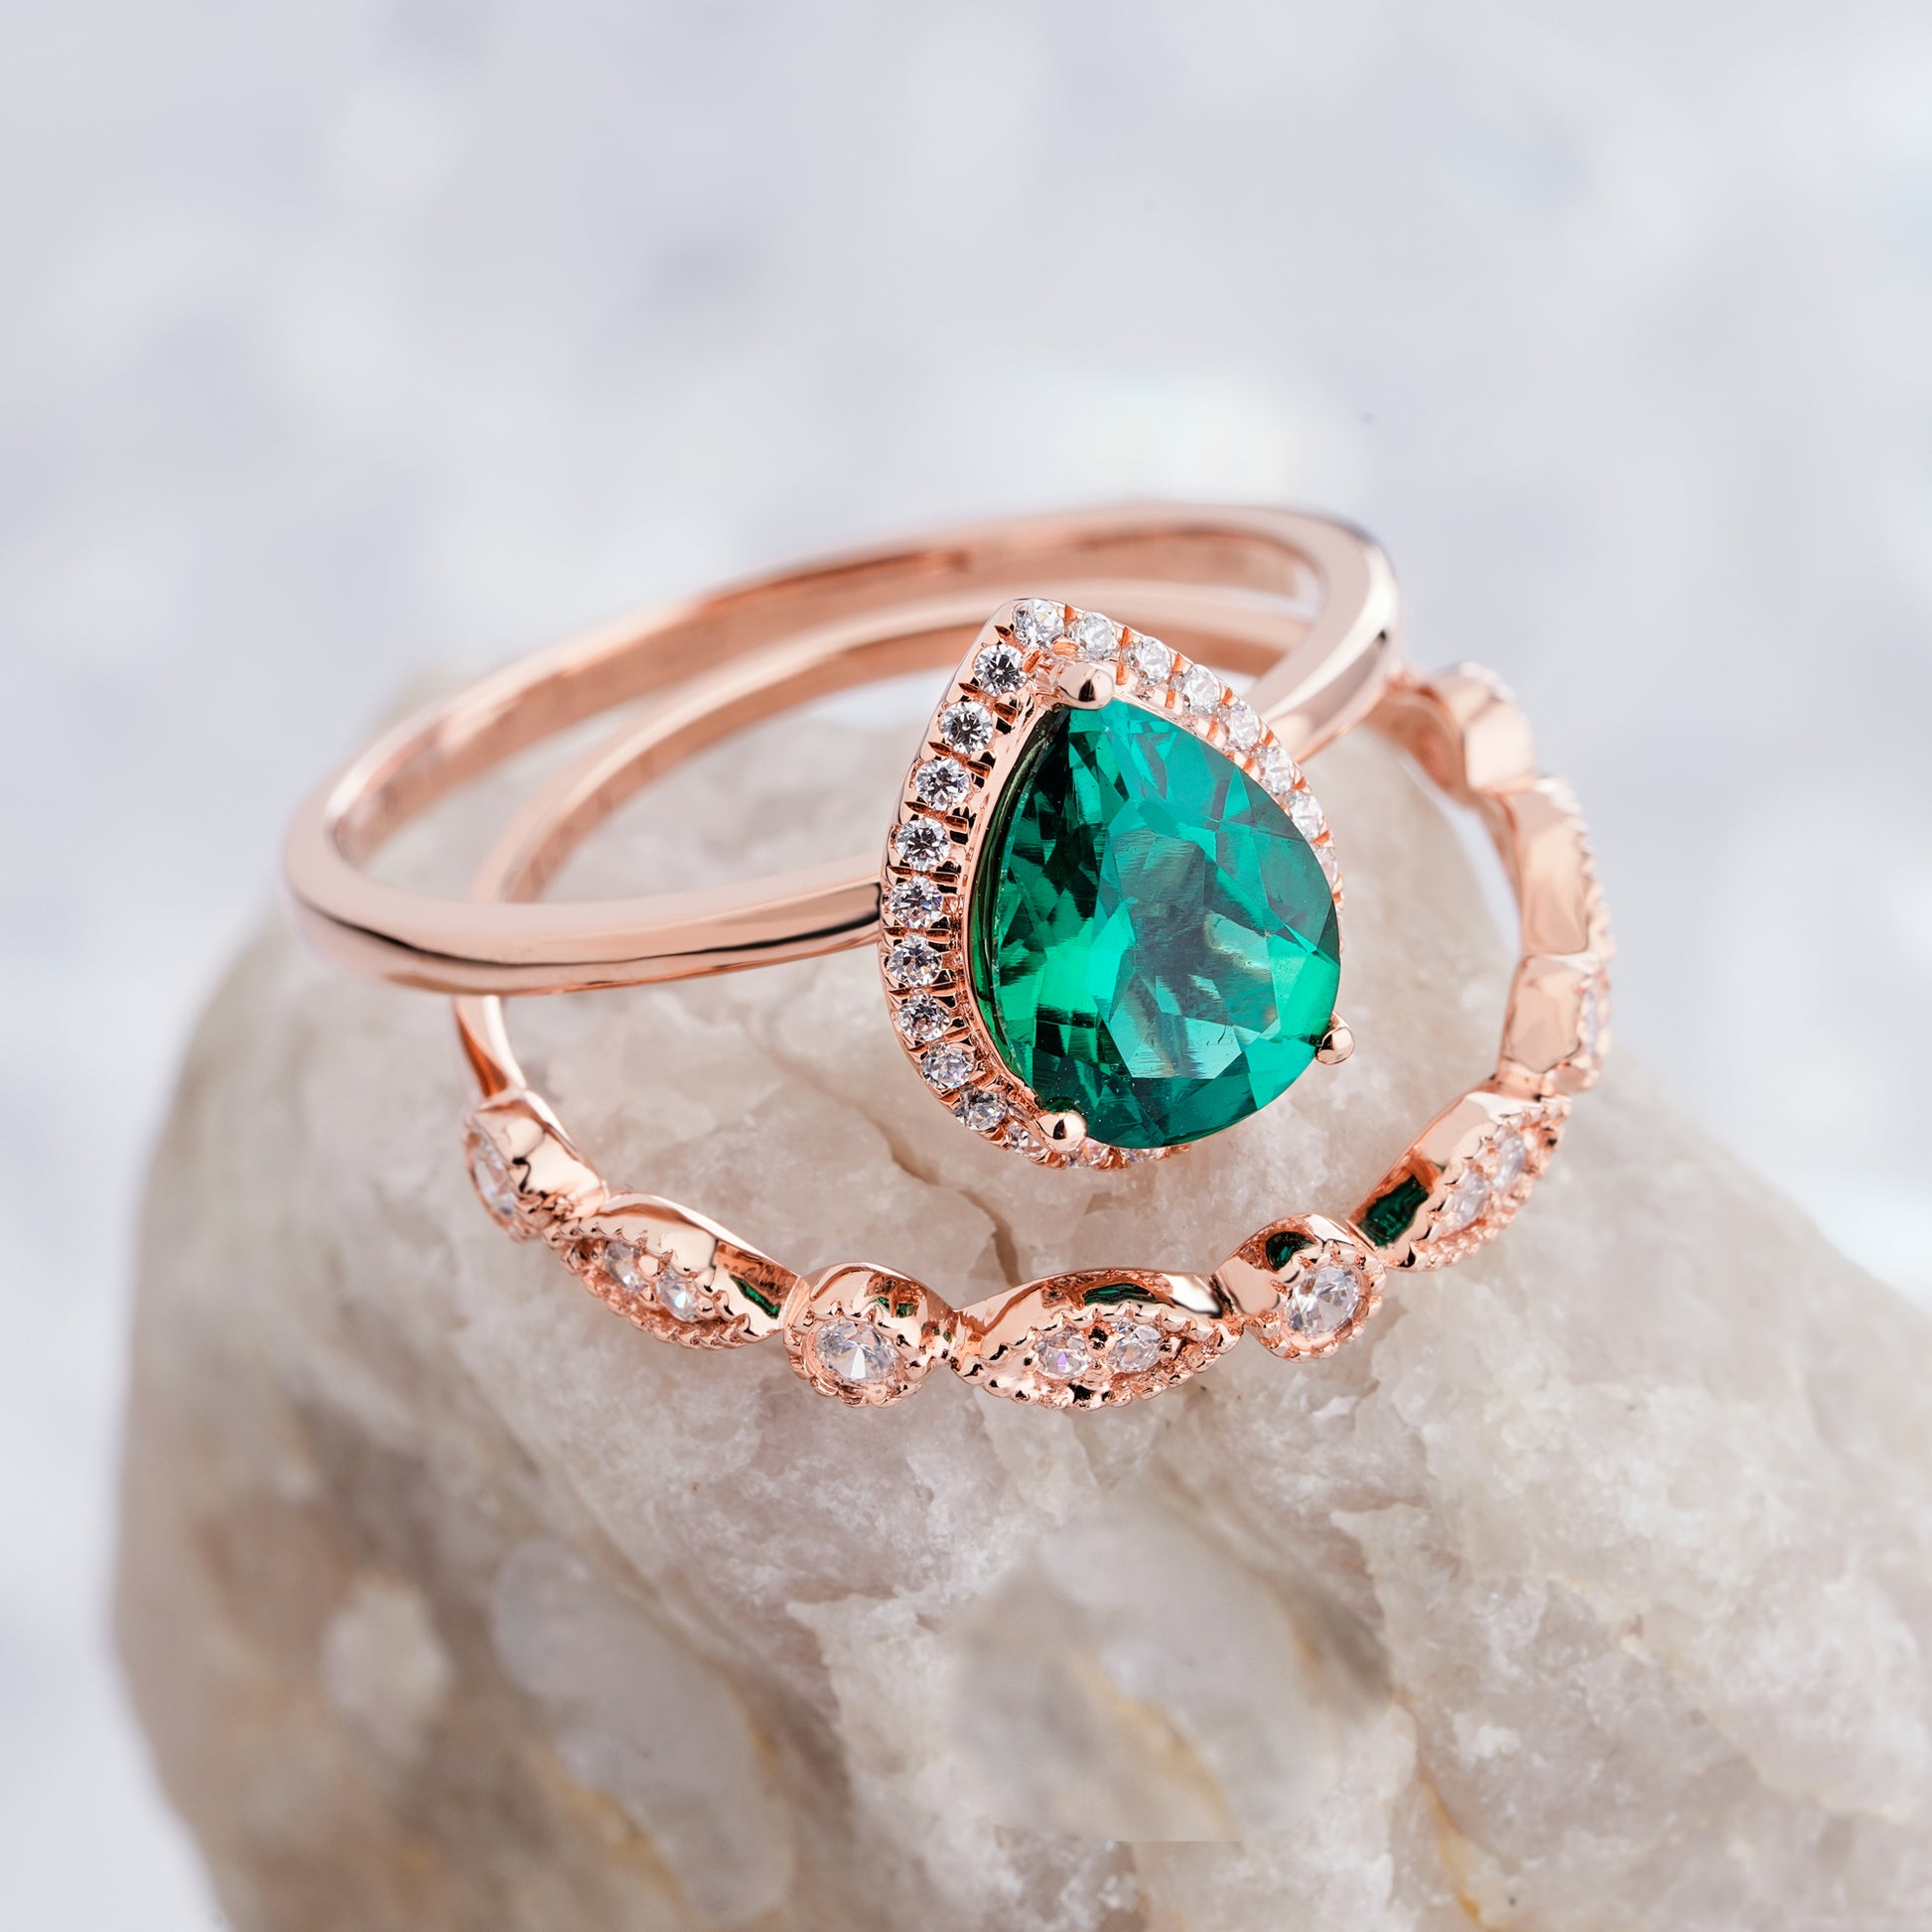 Pear Cut Emerald Engagement Ring Set in 14K/18K Gold - ShainJewelry